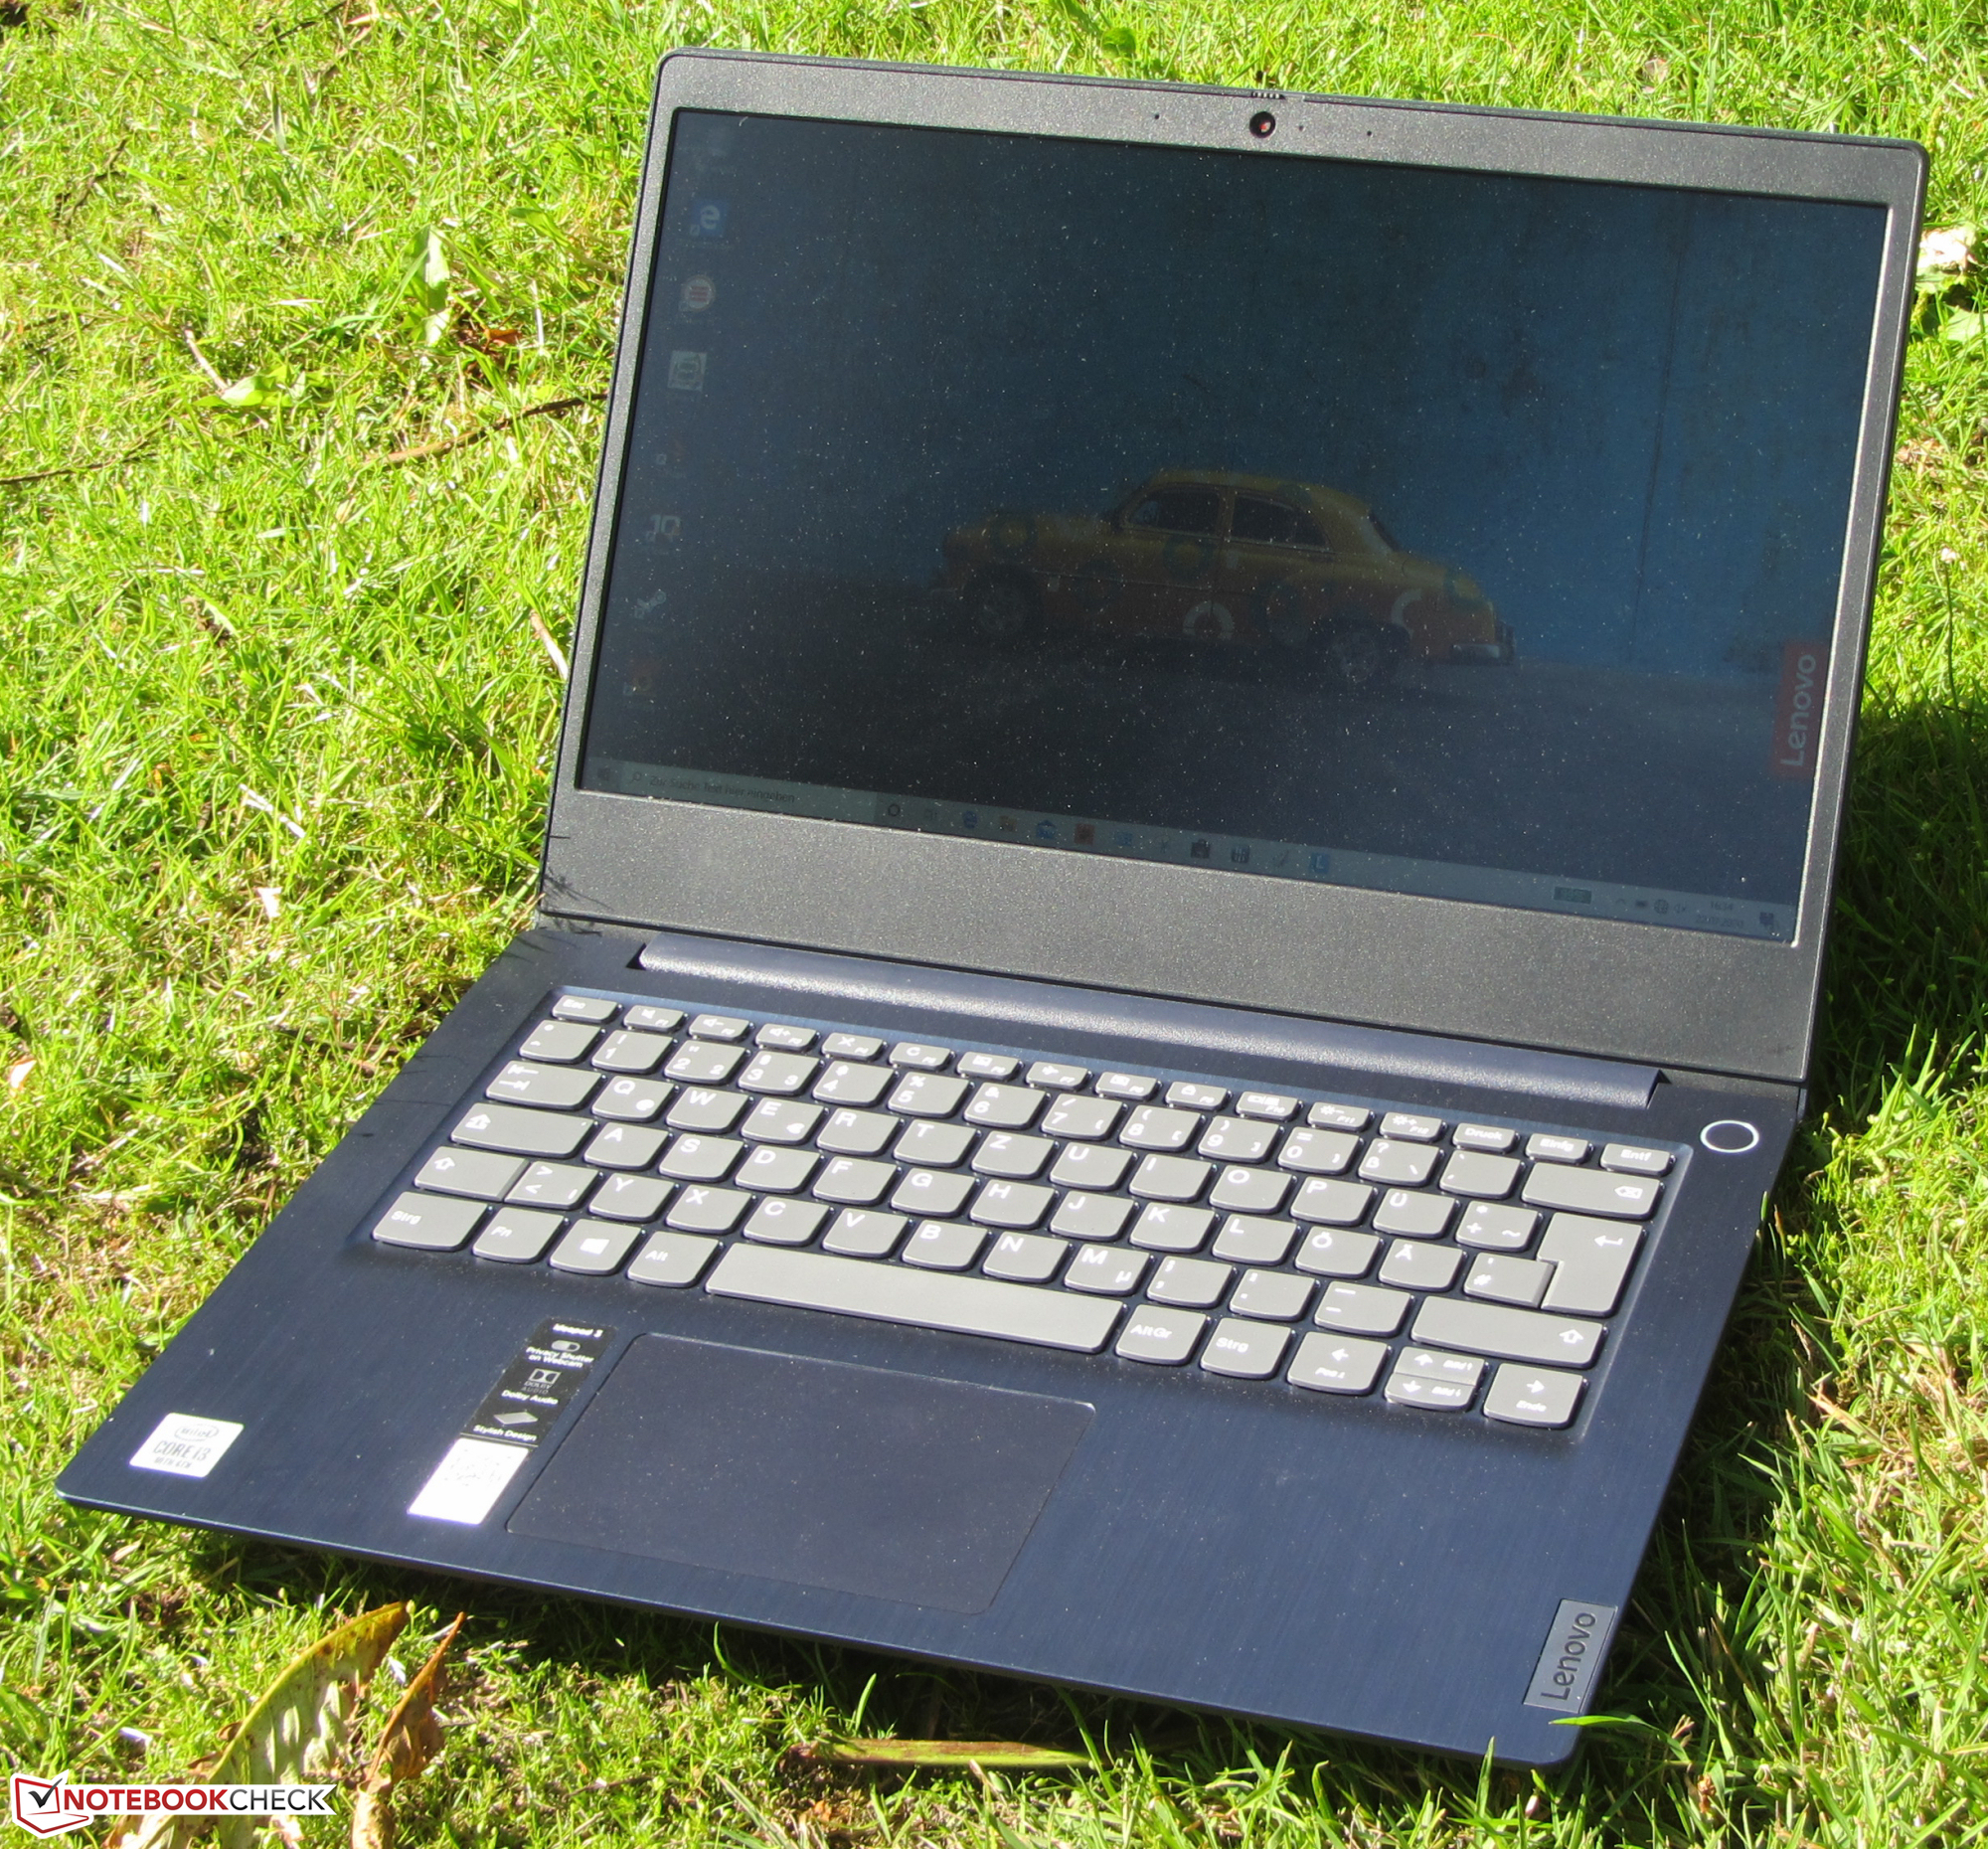 Lenovo IdeaPad 3 14IIL05 in review: Quiet office laptop with